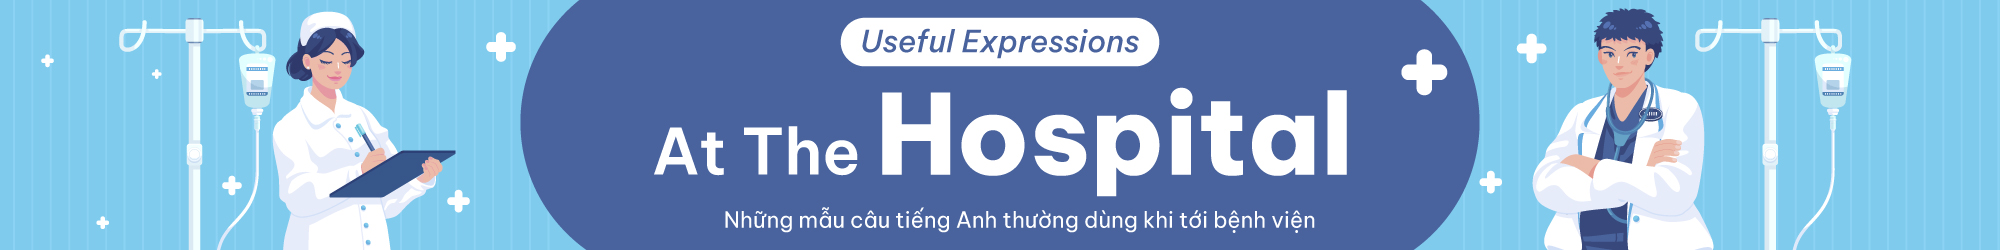 USEFUL EXPRESSIONS AT THE HOSPITAL banner